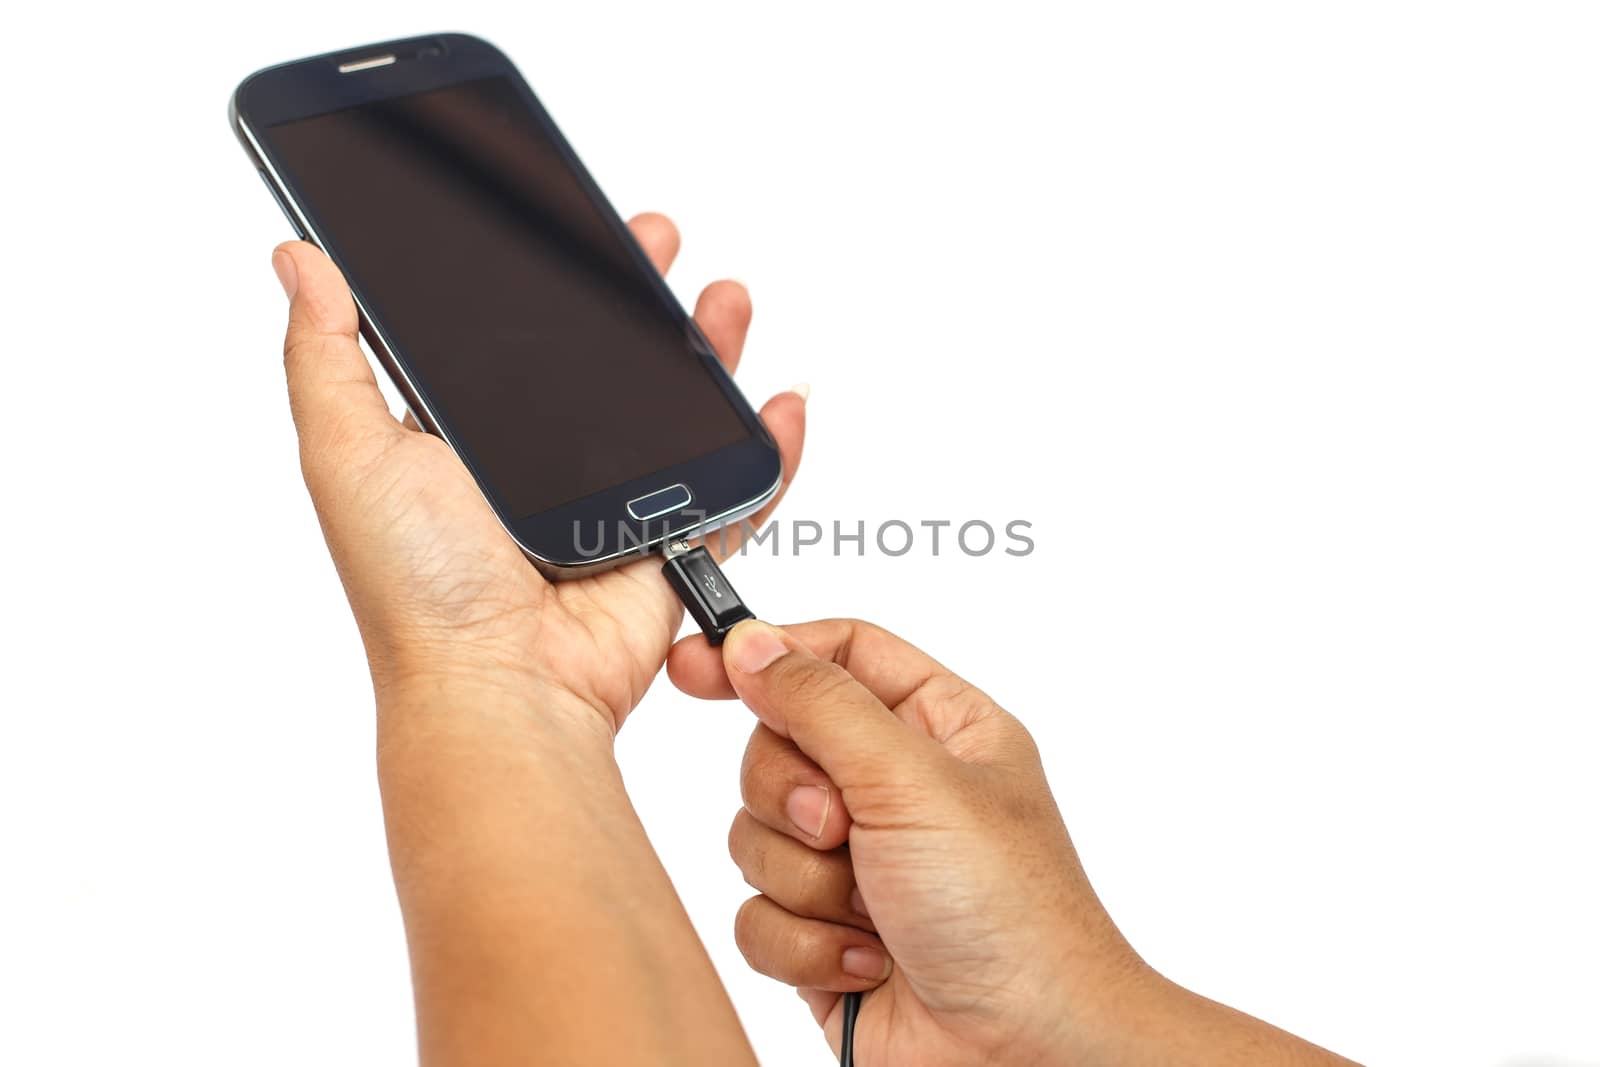 Hand holding smartphone and connect charger isolated on white background